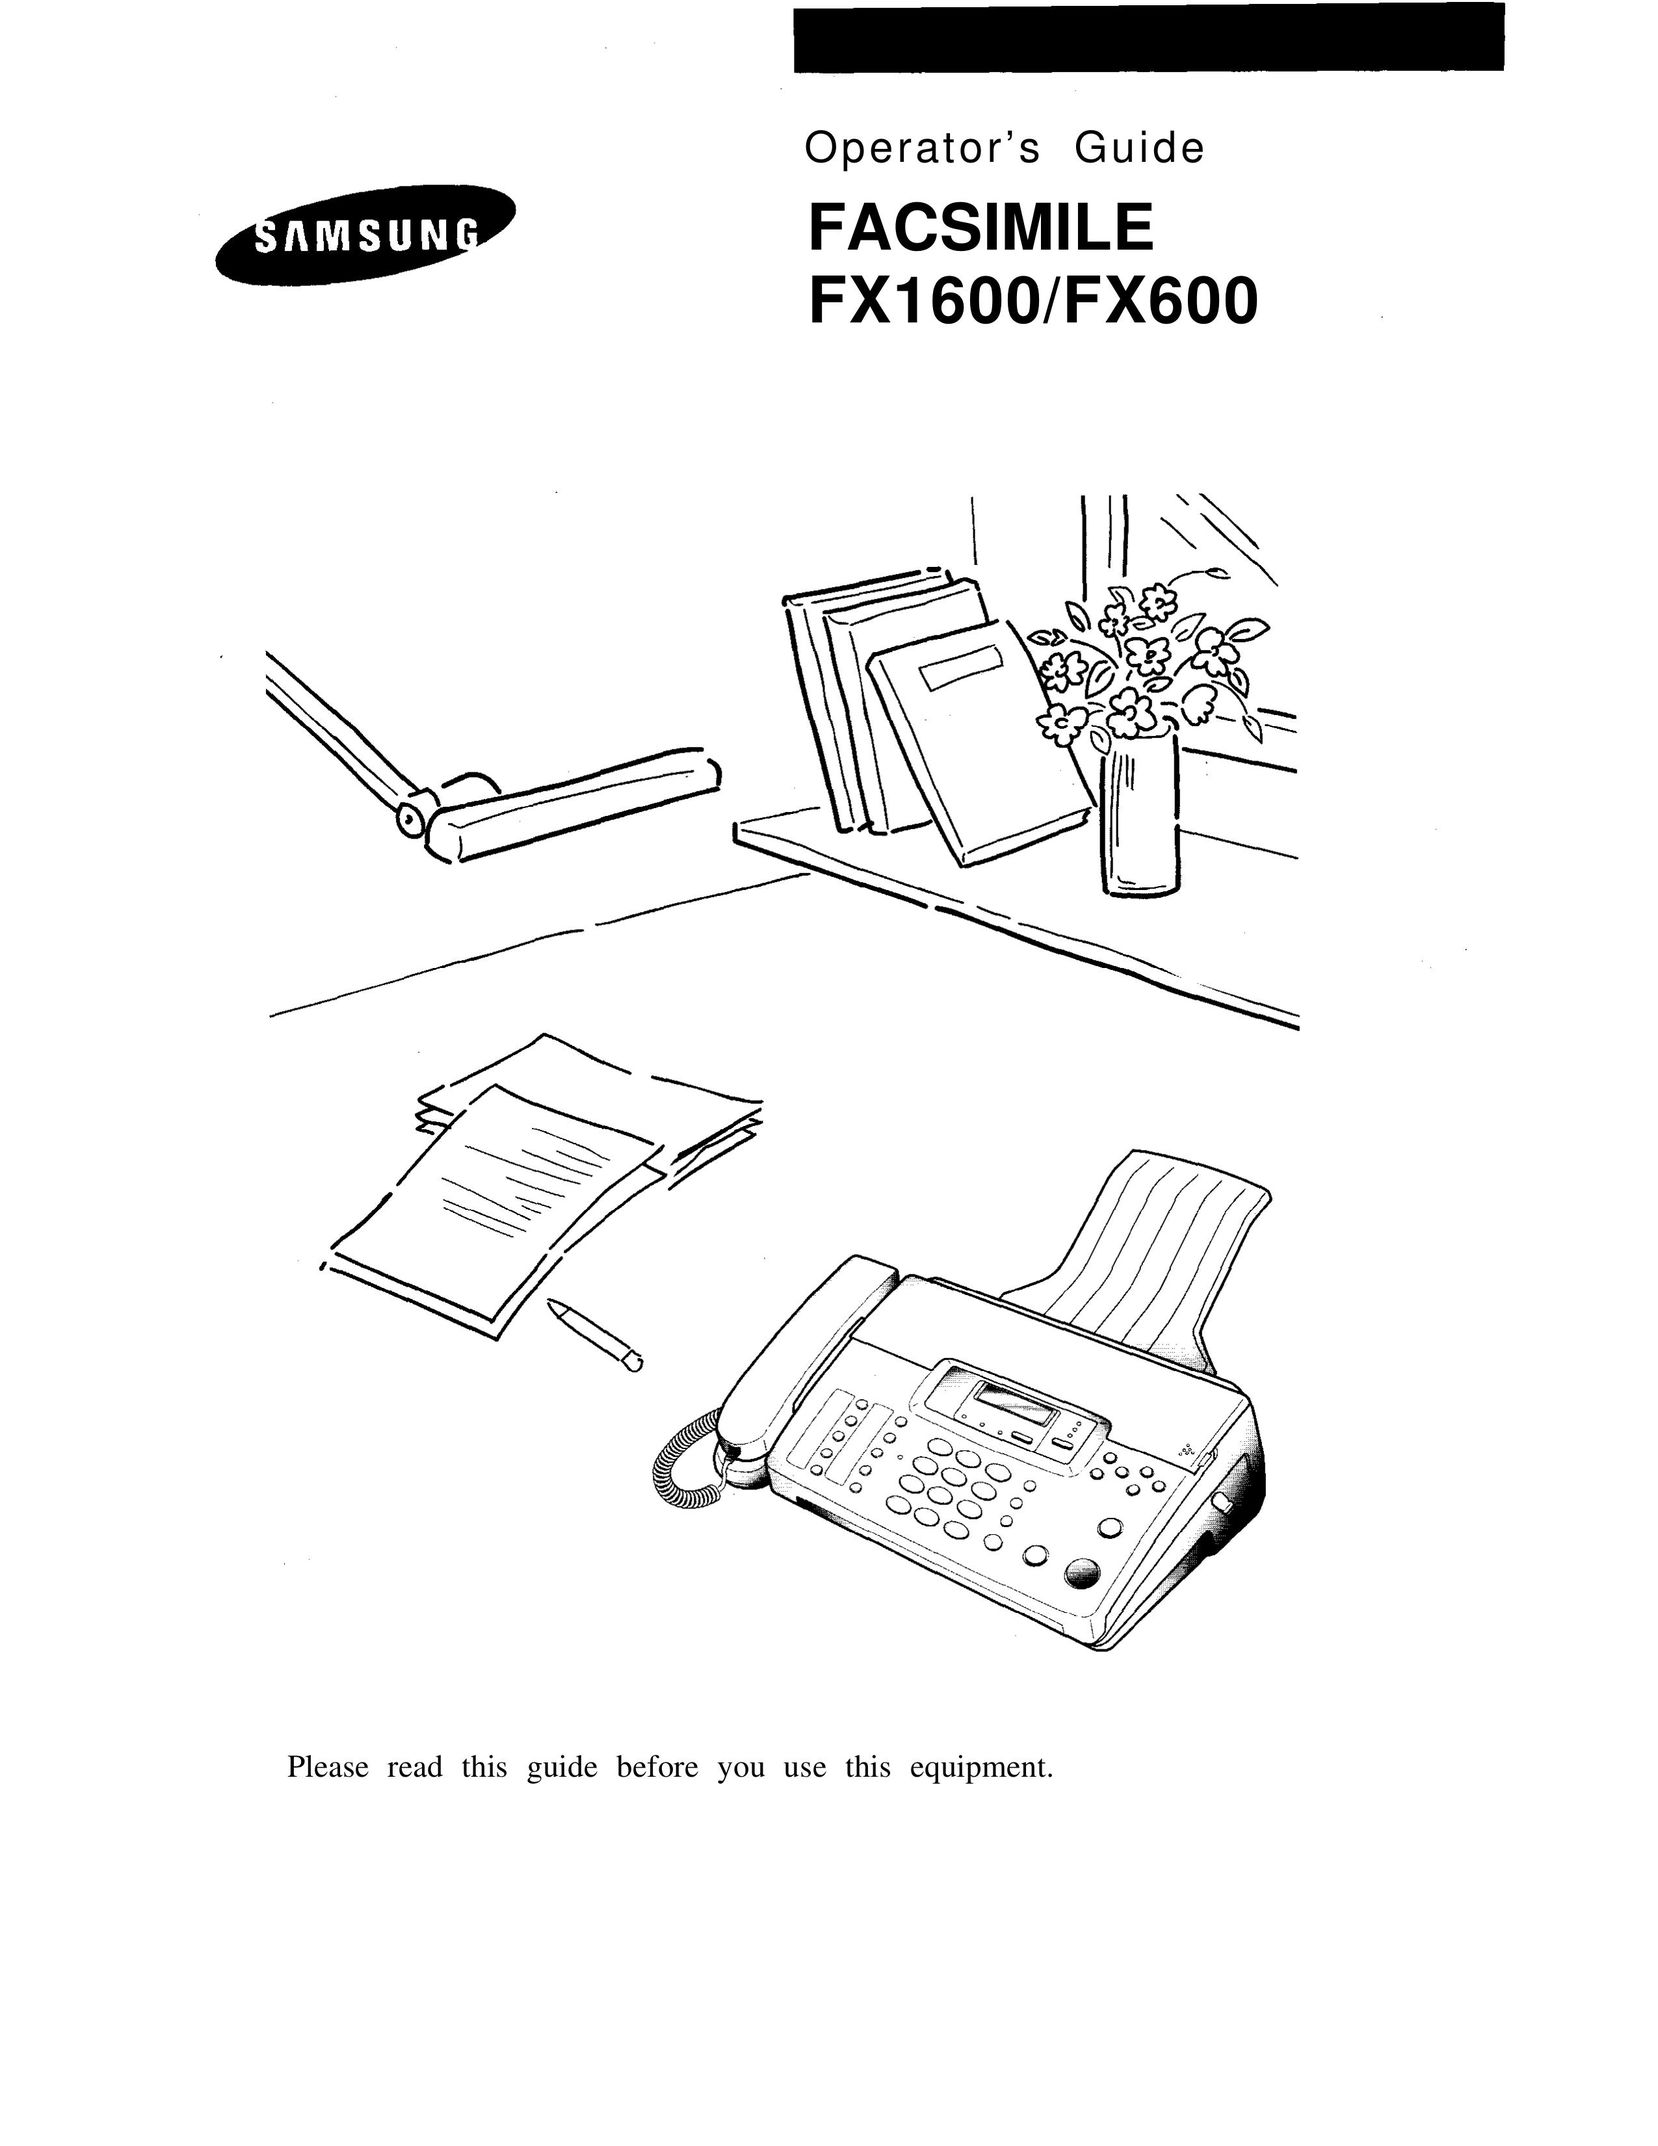 Samsung FX600 All in One Printer User Manual